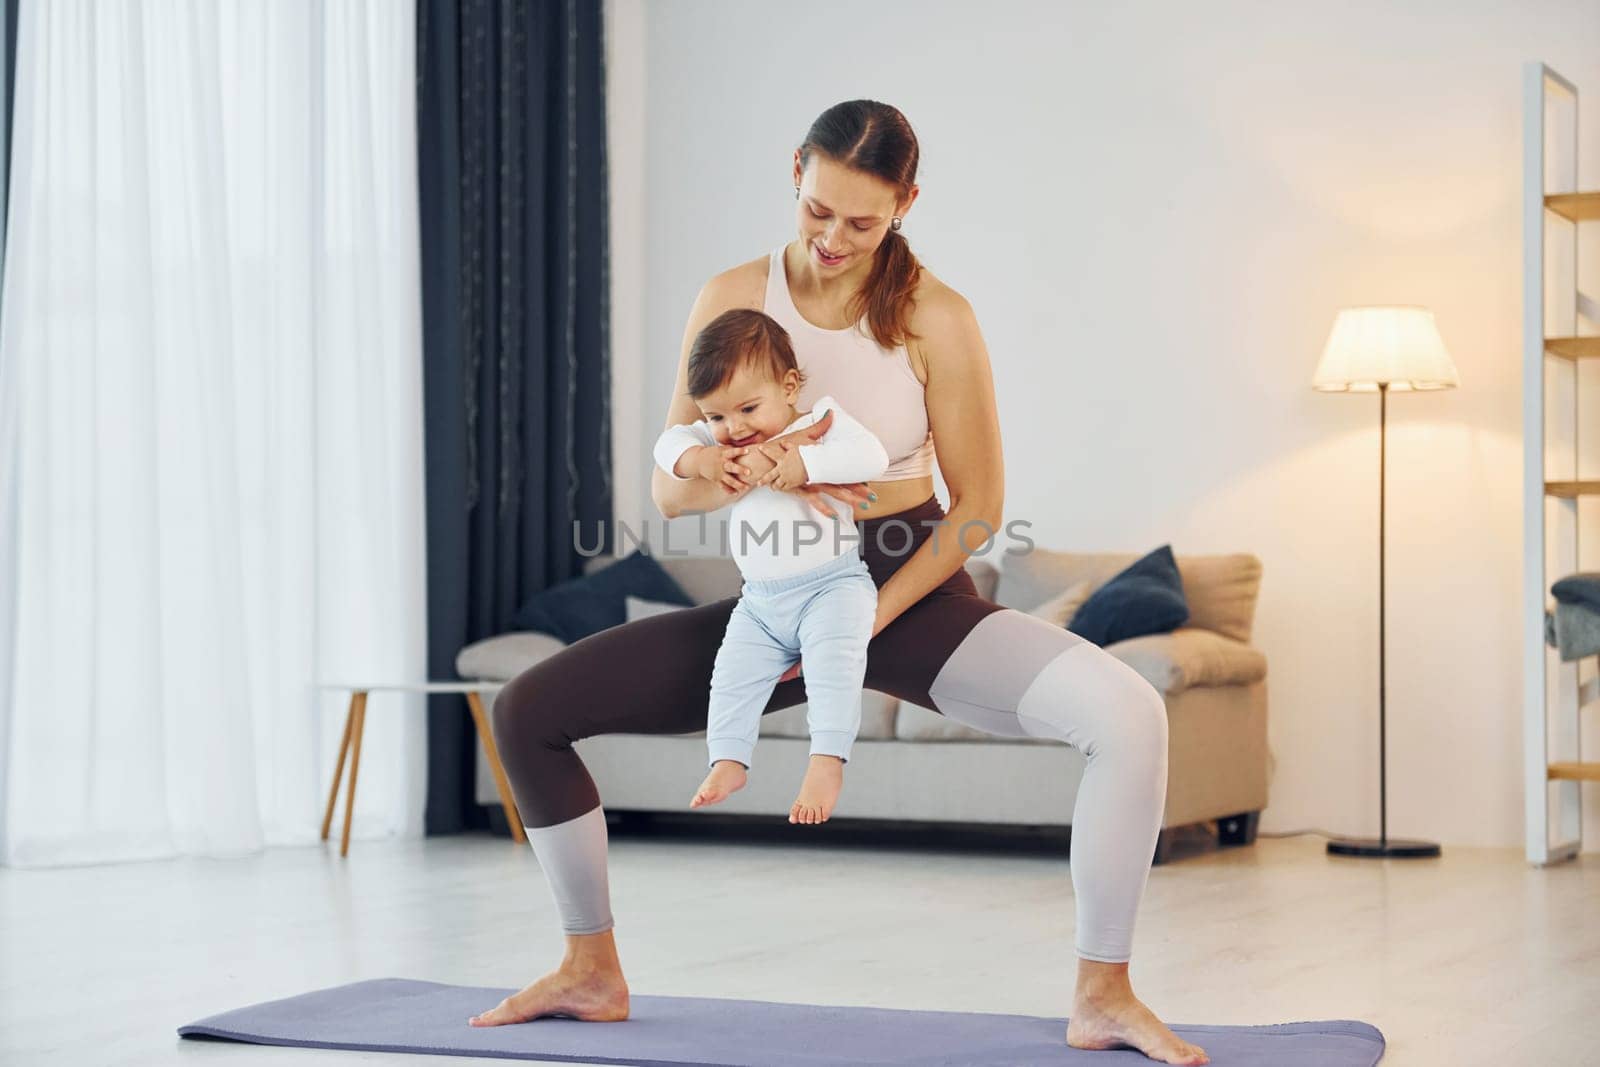 Standing on the mat and doing exerises. Mother with her little daughter is at home together.